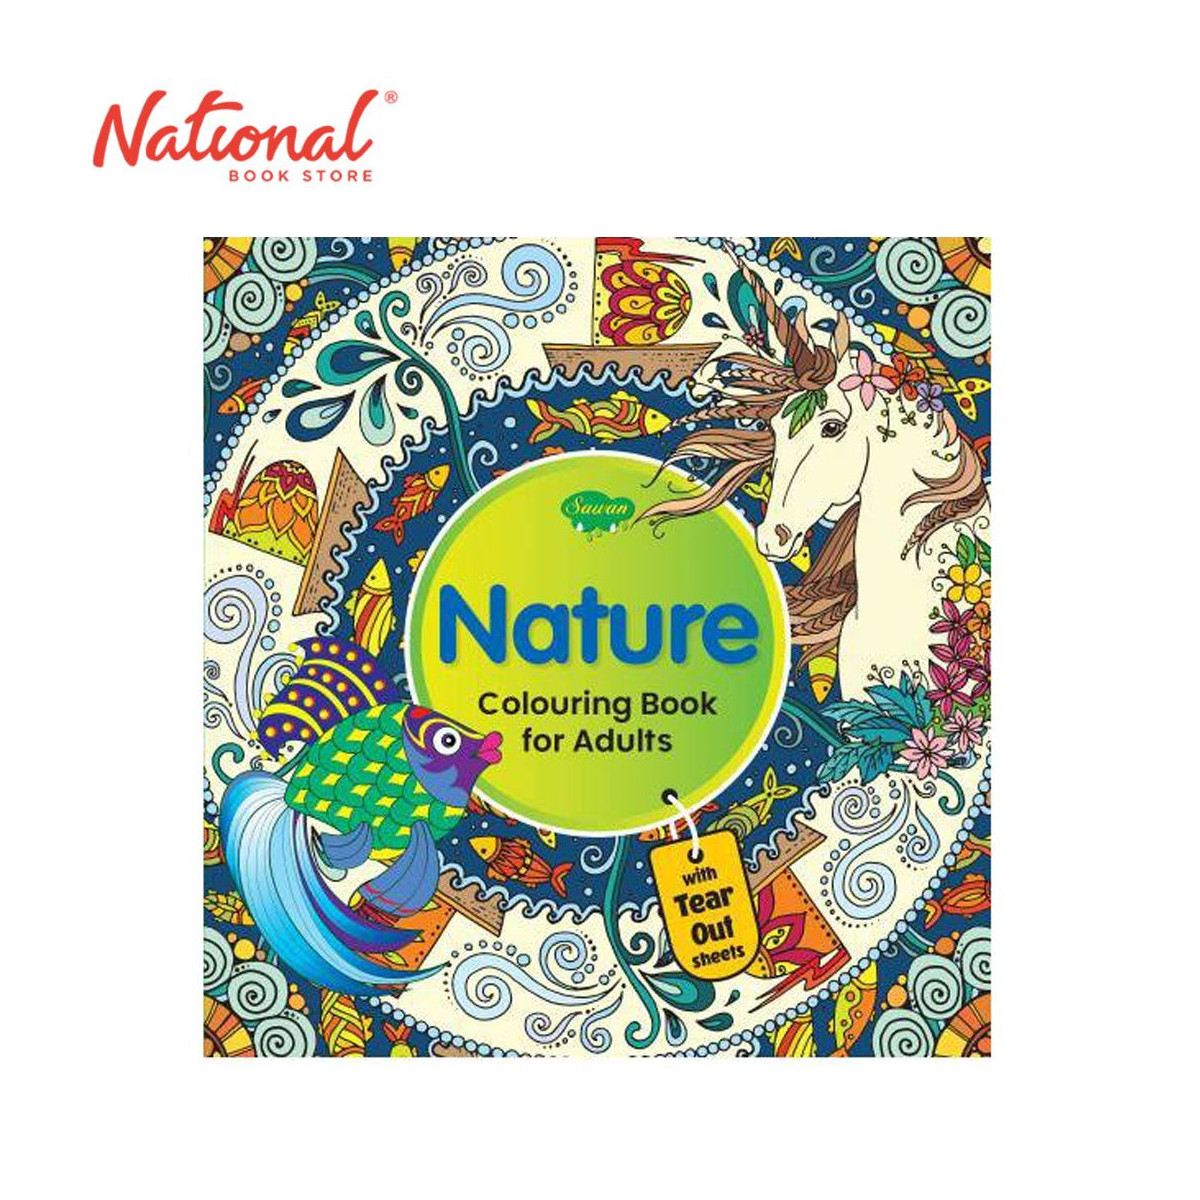 Nature Colouring Book For Adult - Trade Paperback - Art Books